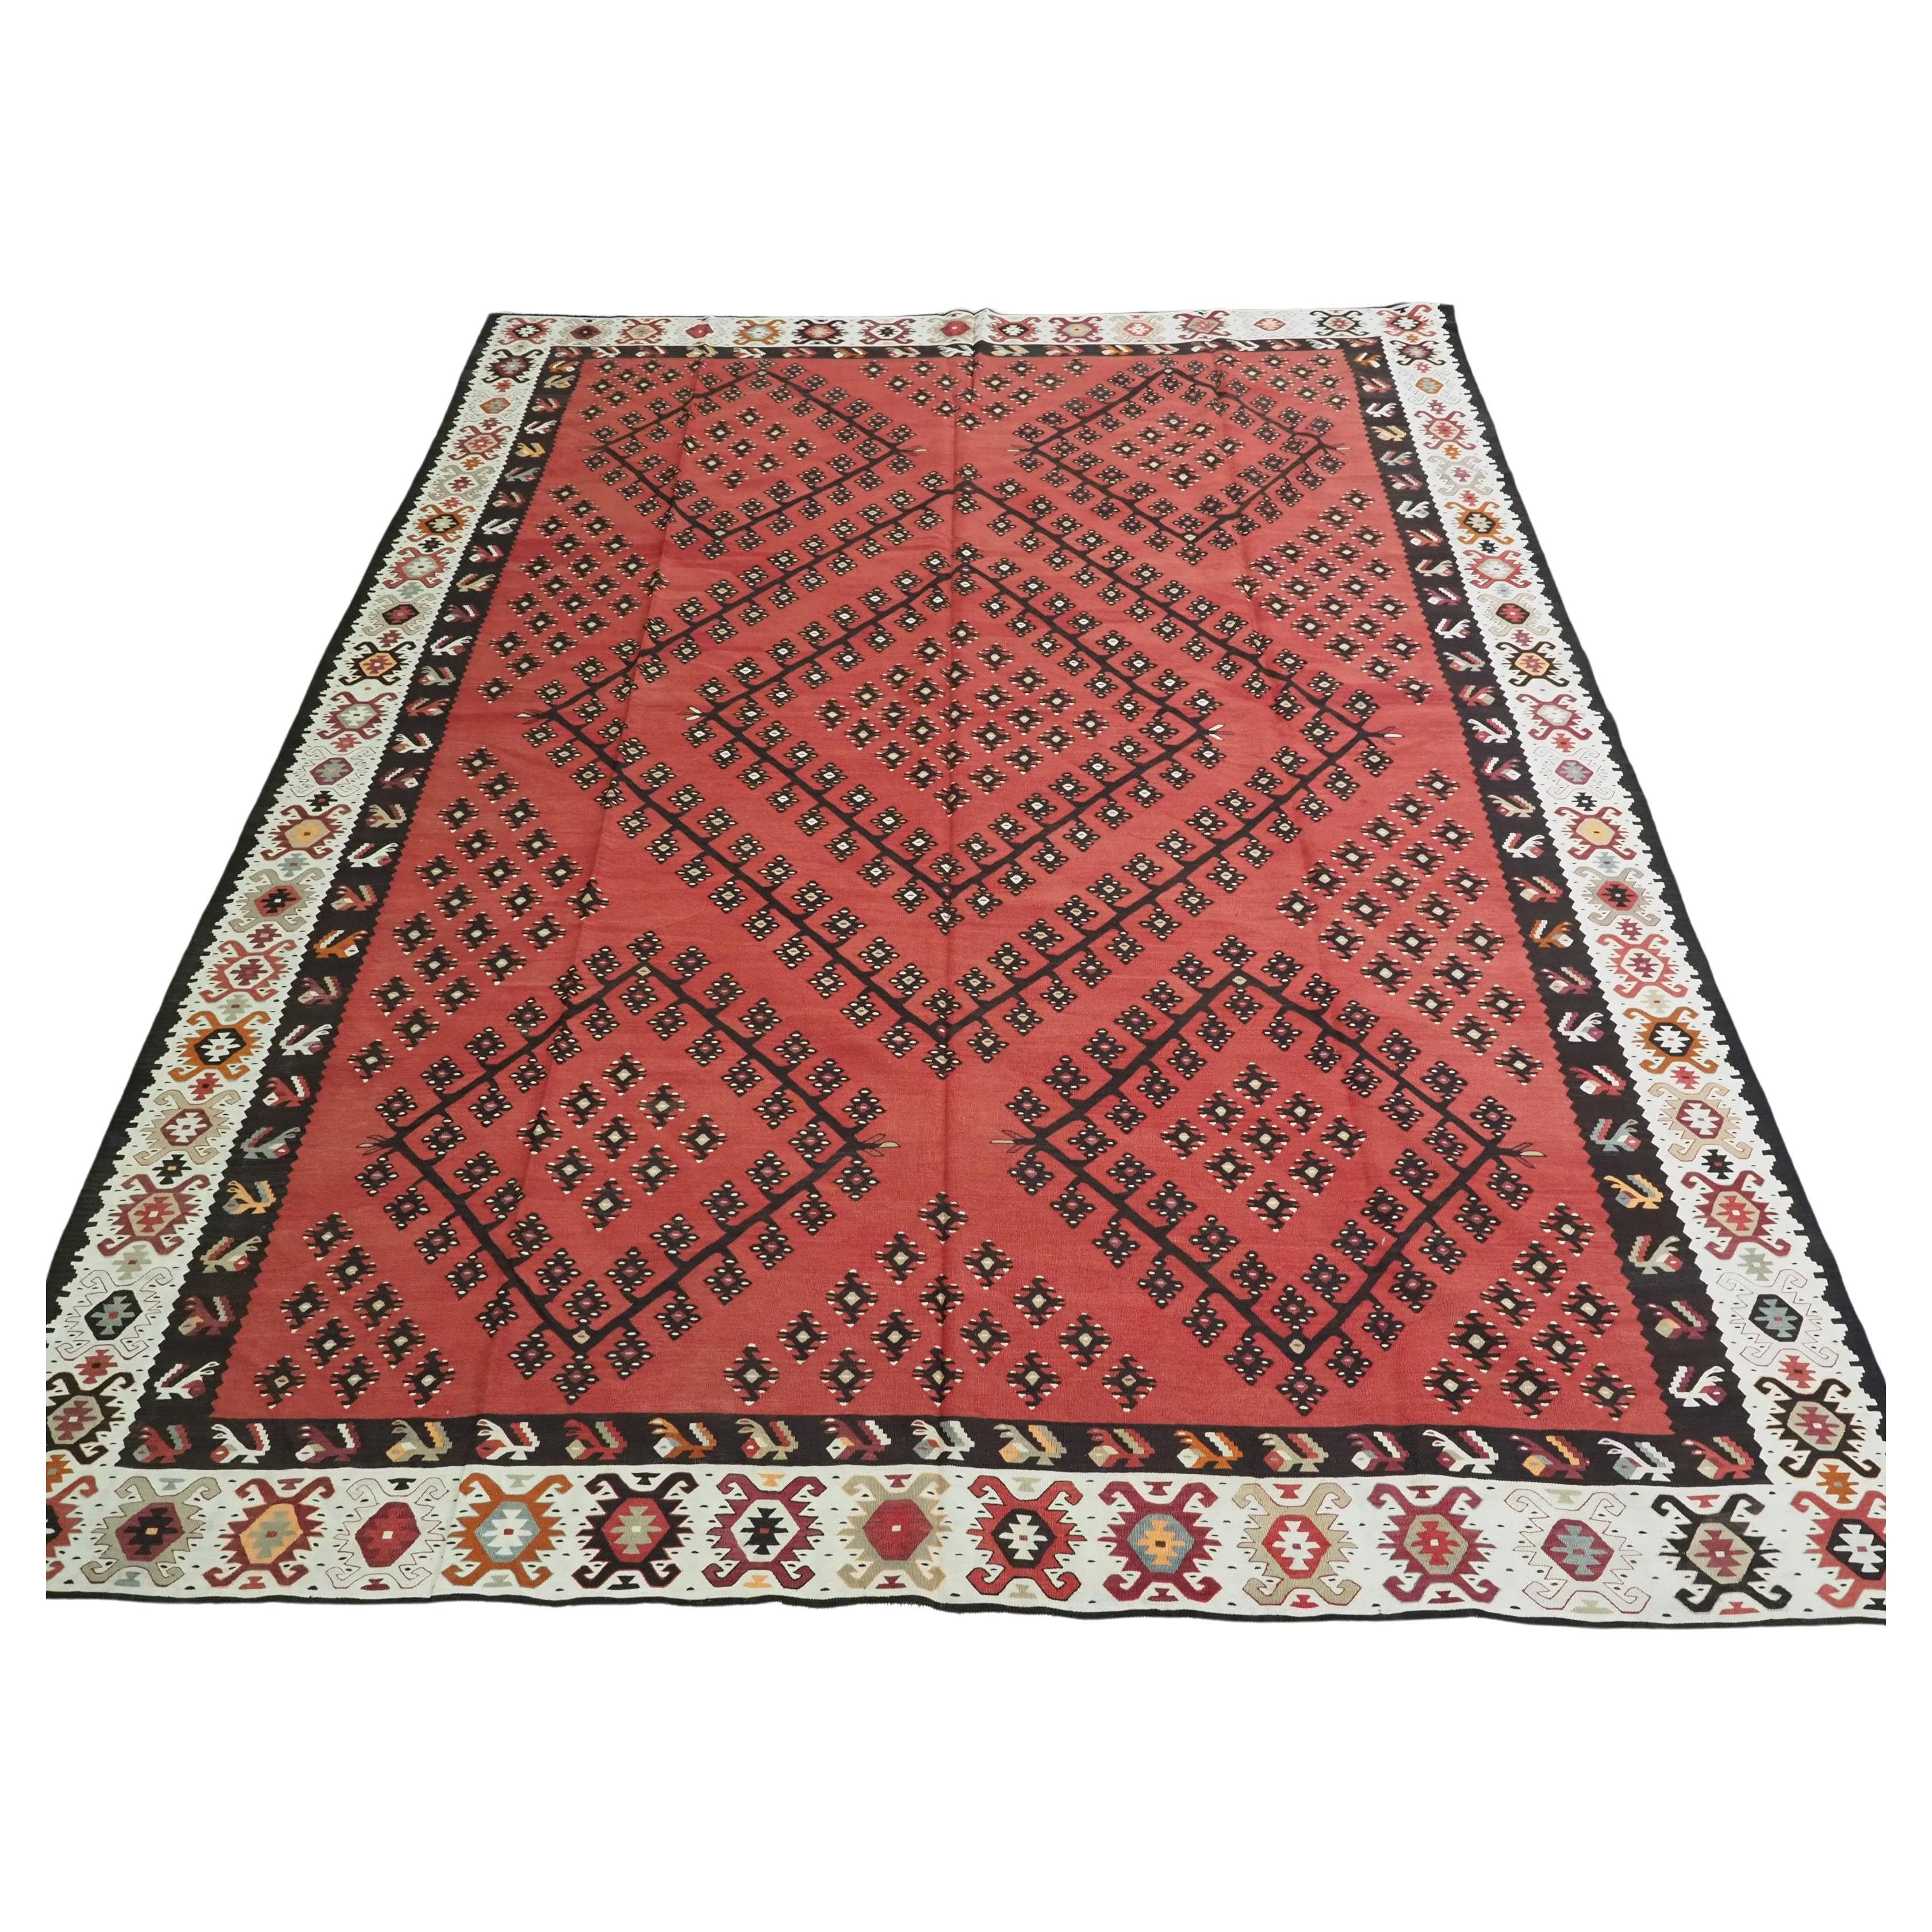 Antique Pirot/ Sarkoy kilim of traditional design & large room size, circa 1920.